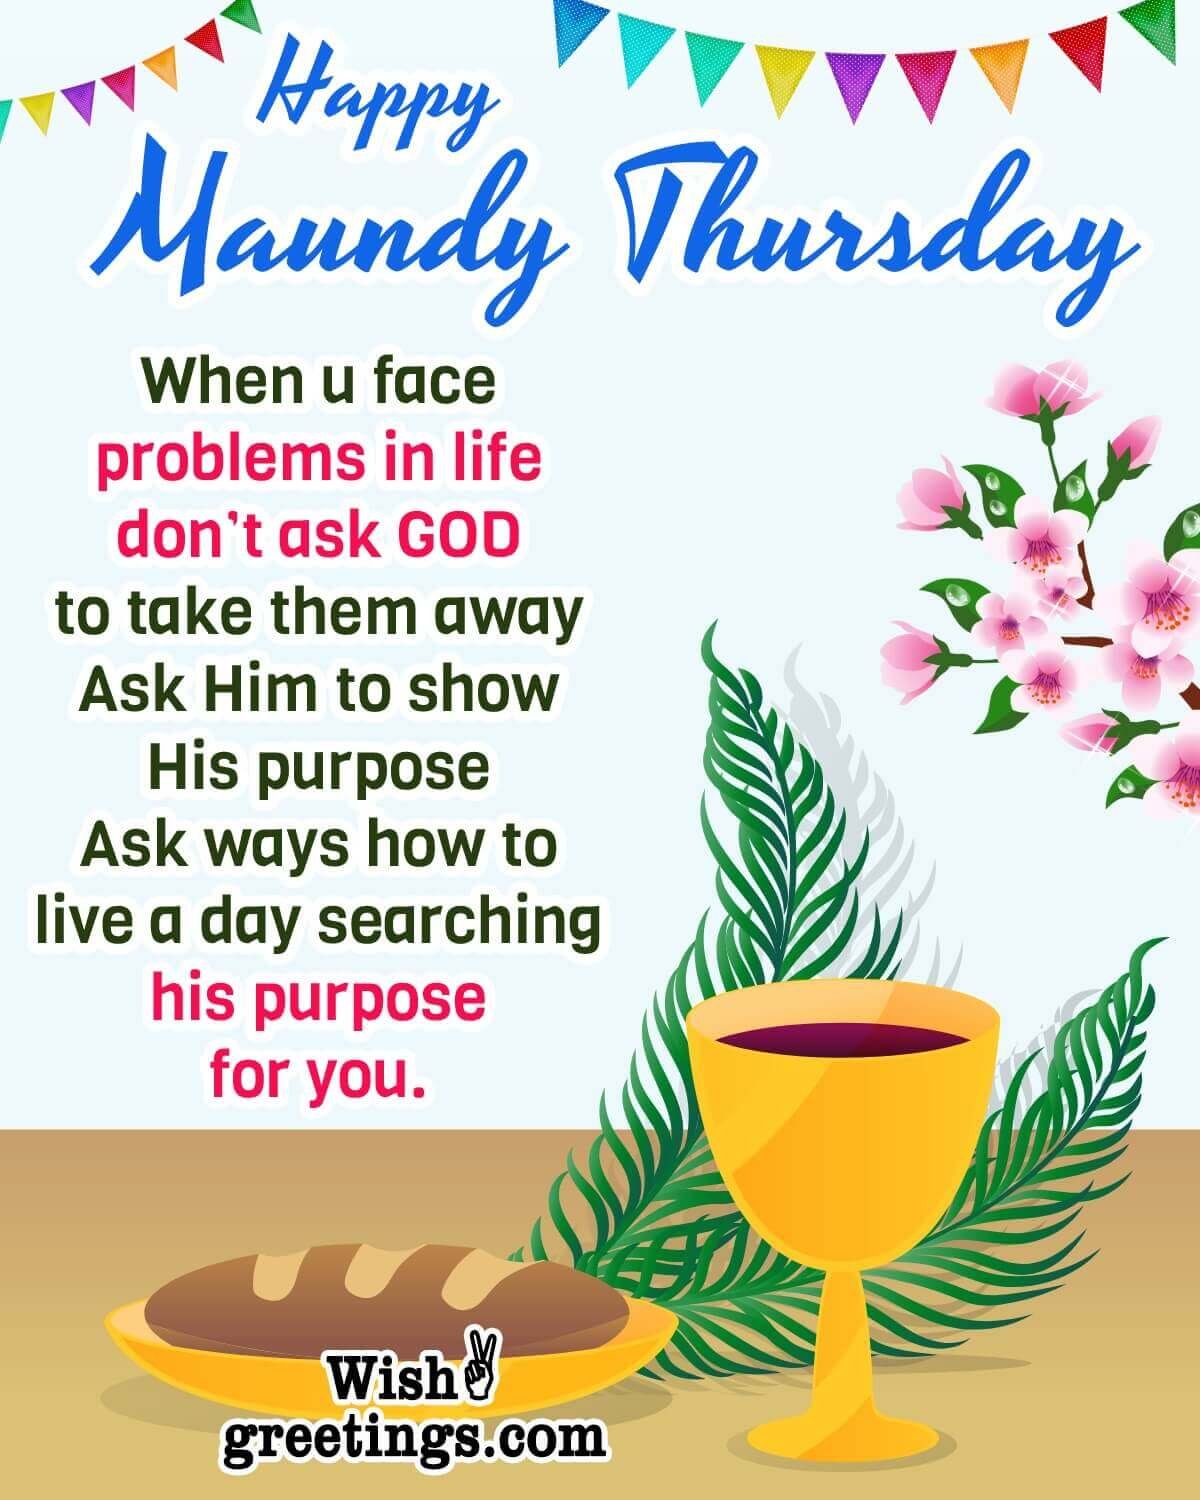 Happy Maundy Thursday Message Pic